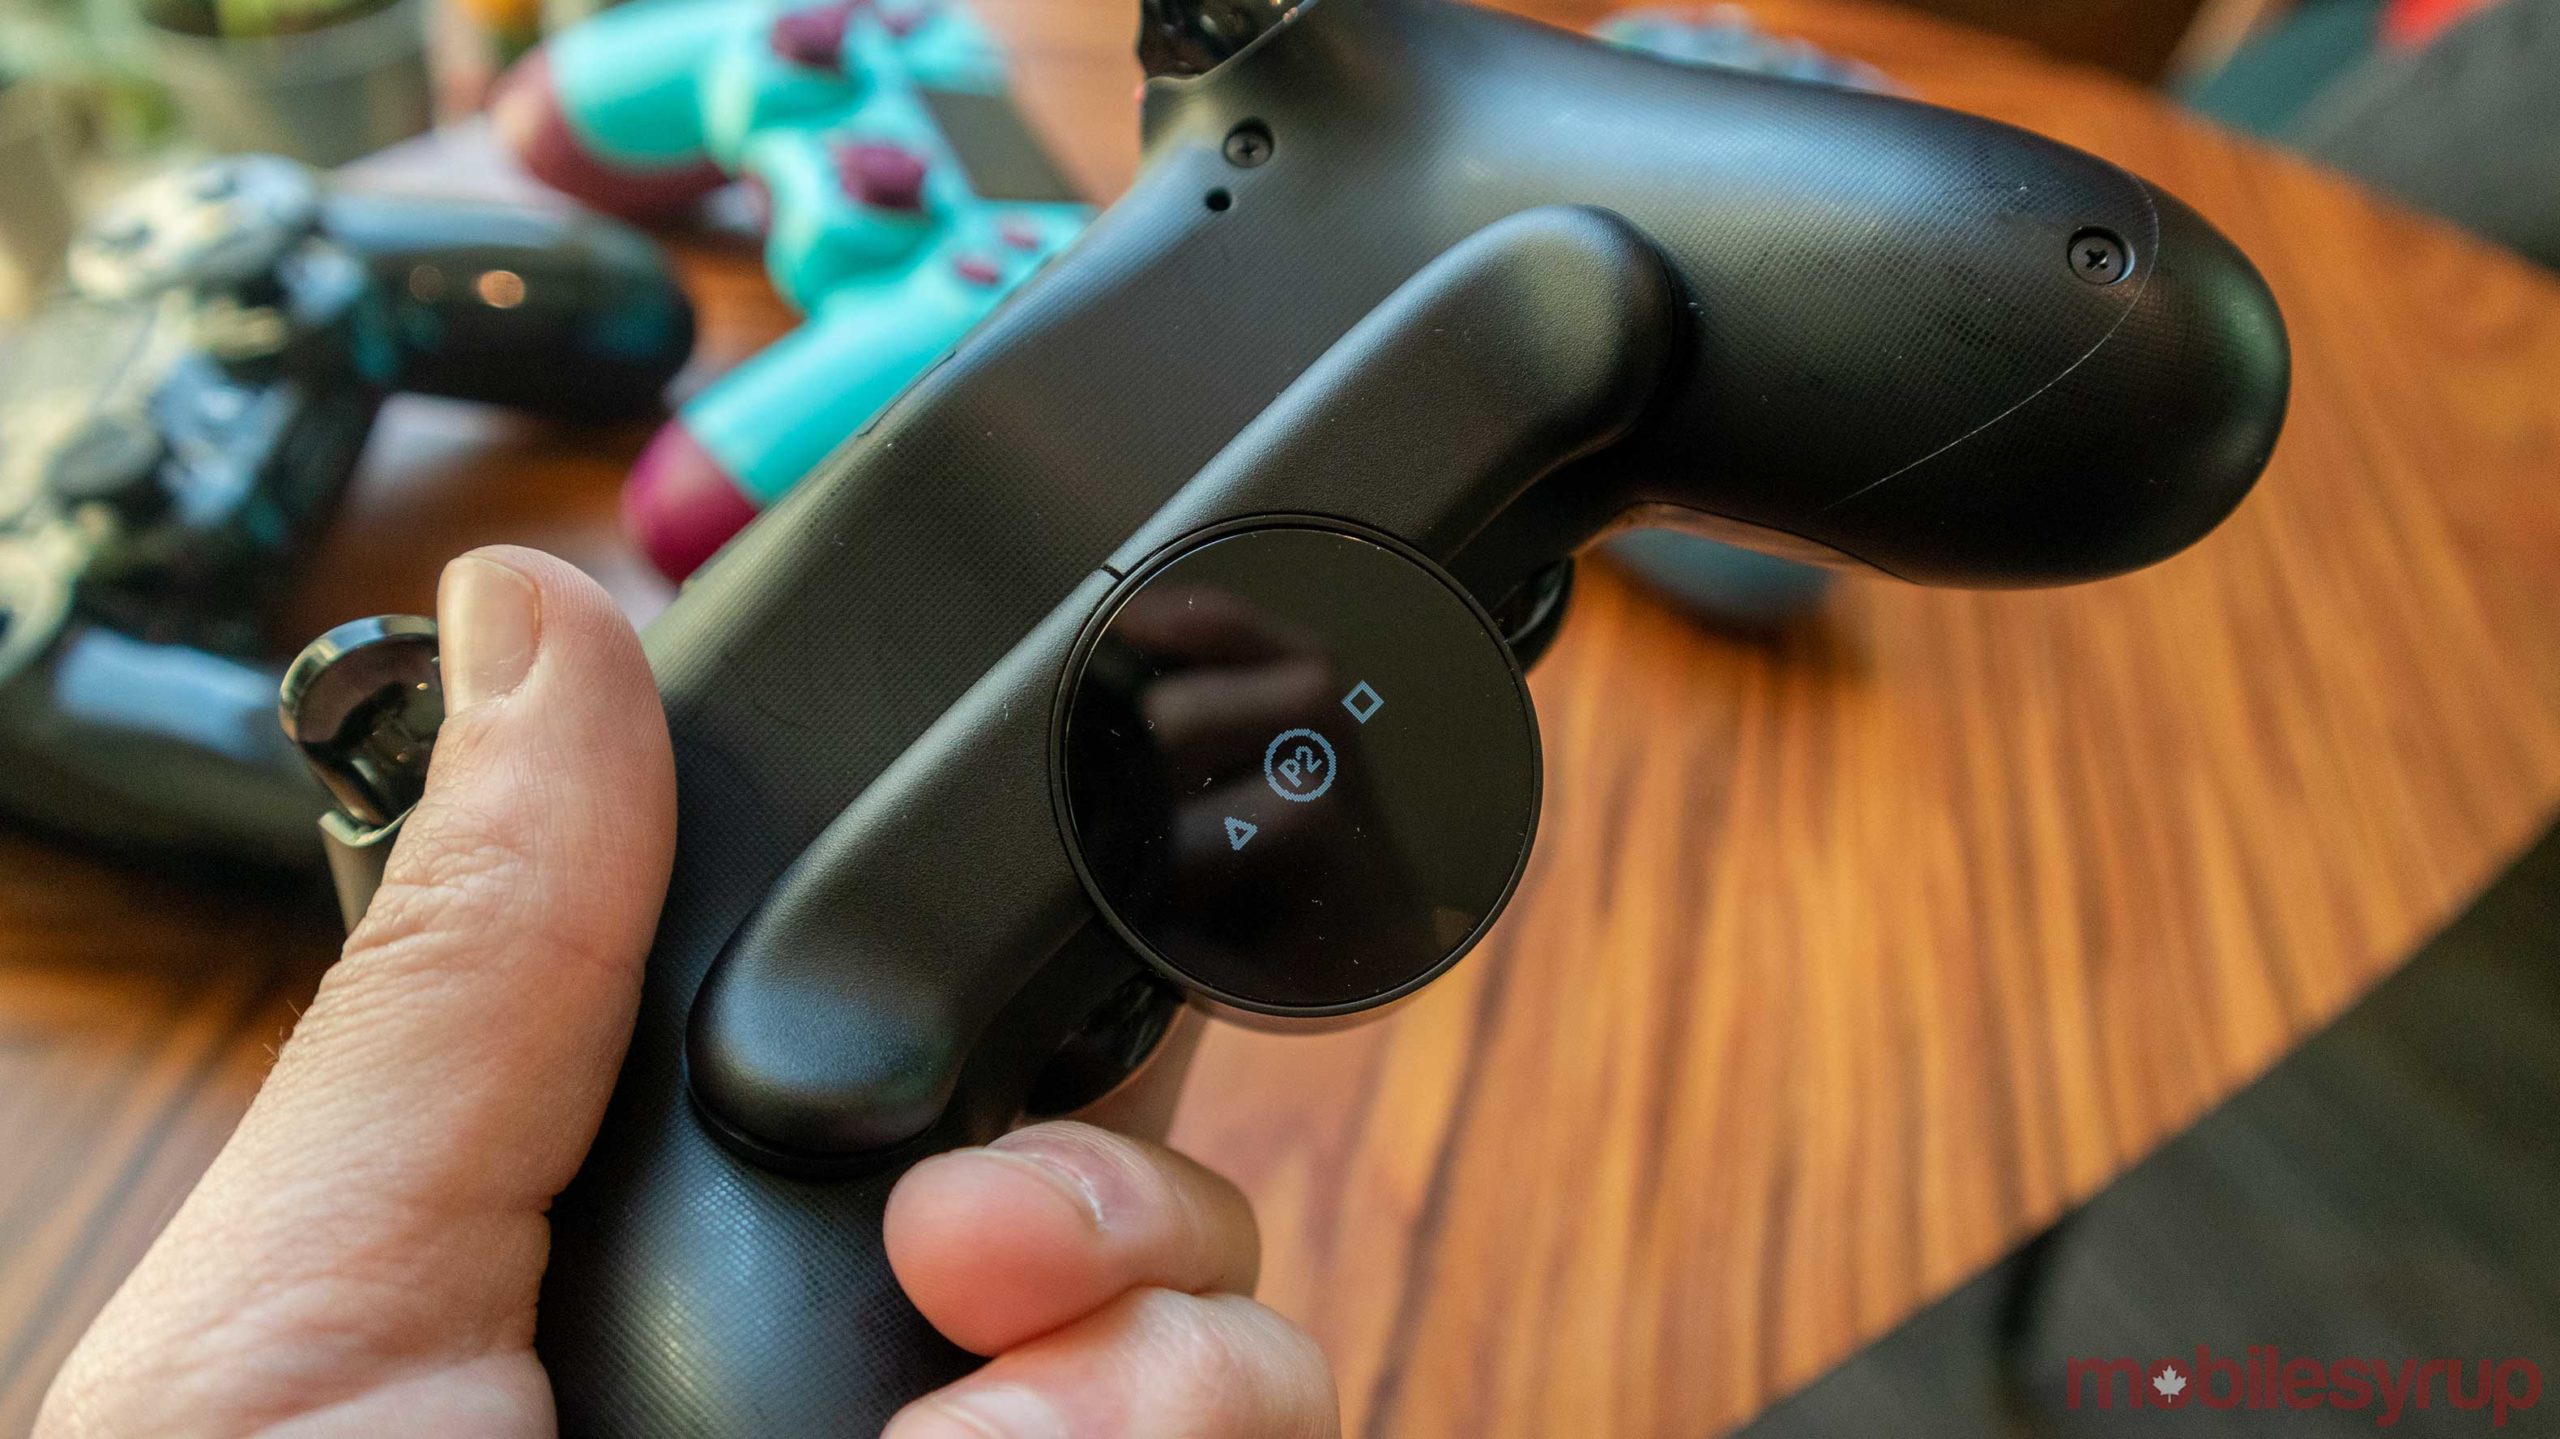 button on back of ps4 controller